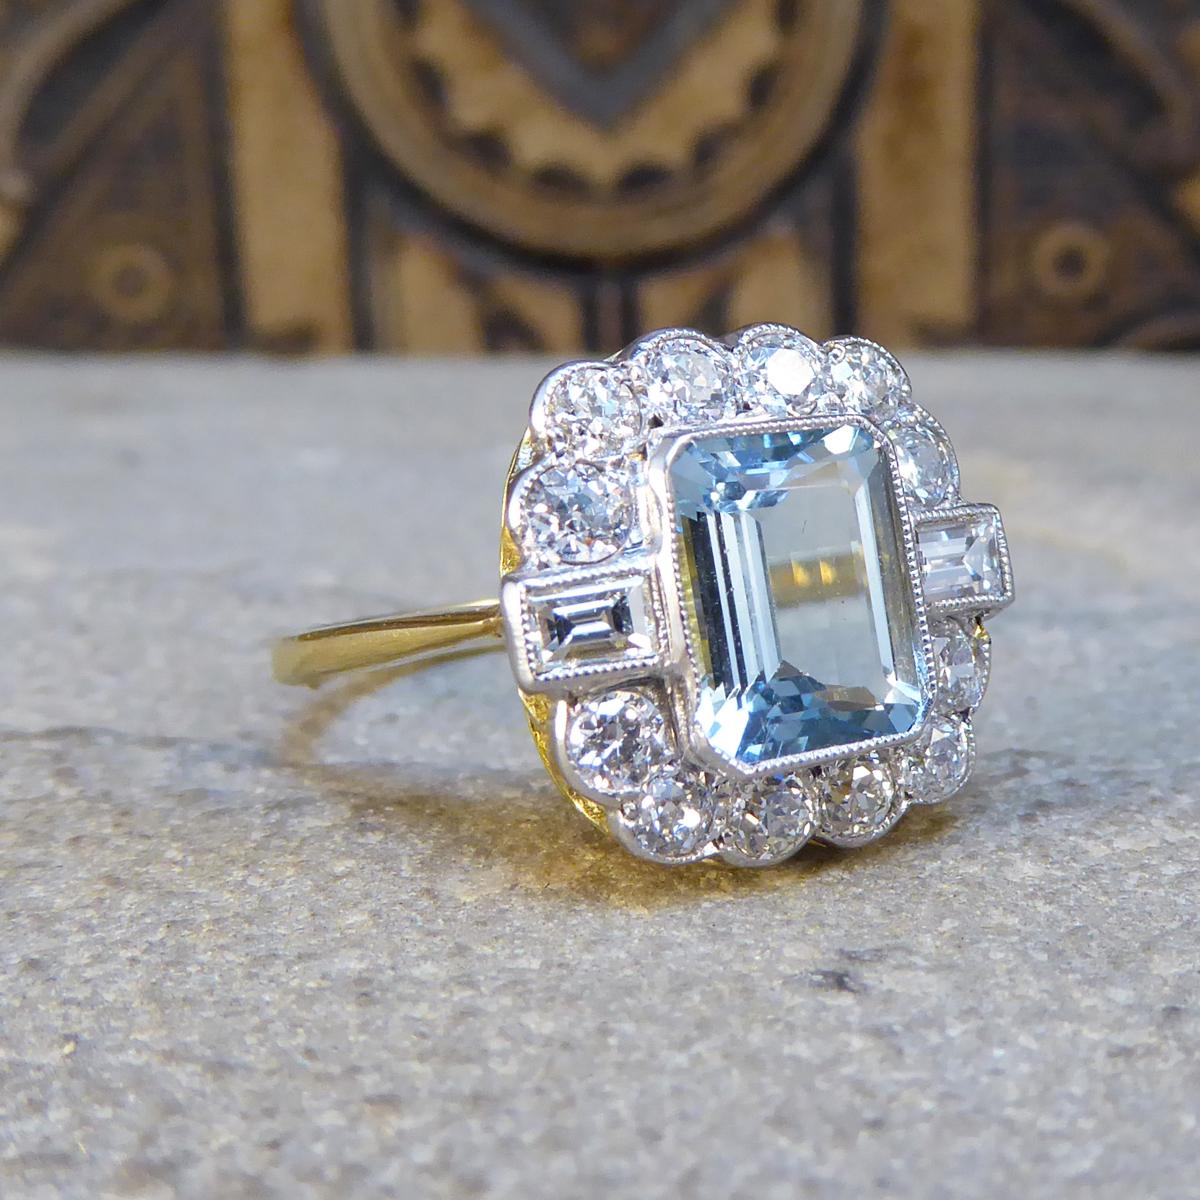 This gorgeous 1.50ct Emerald cut Aquamarine is surrounded by 6 brilliant cut diamonds along the top and bottom of the stone with two baguette cut diamonds running horizontal through the middle creating a cluster. This piece is a contemporary ring